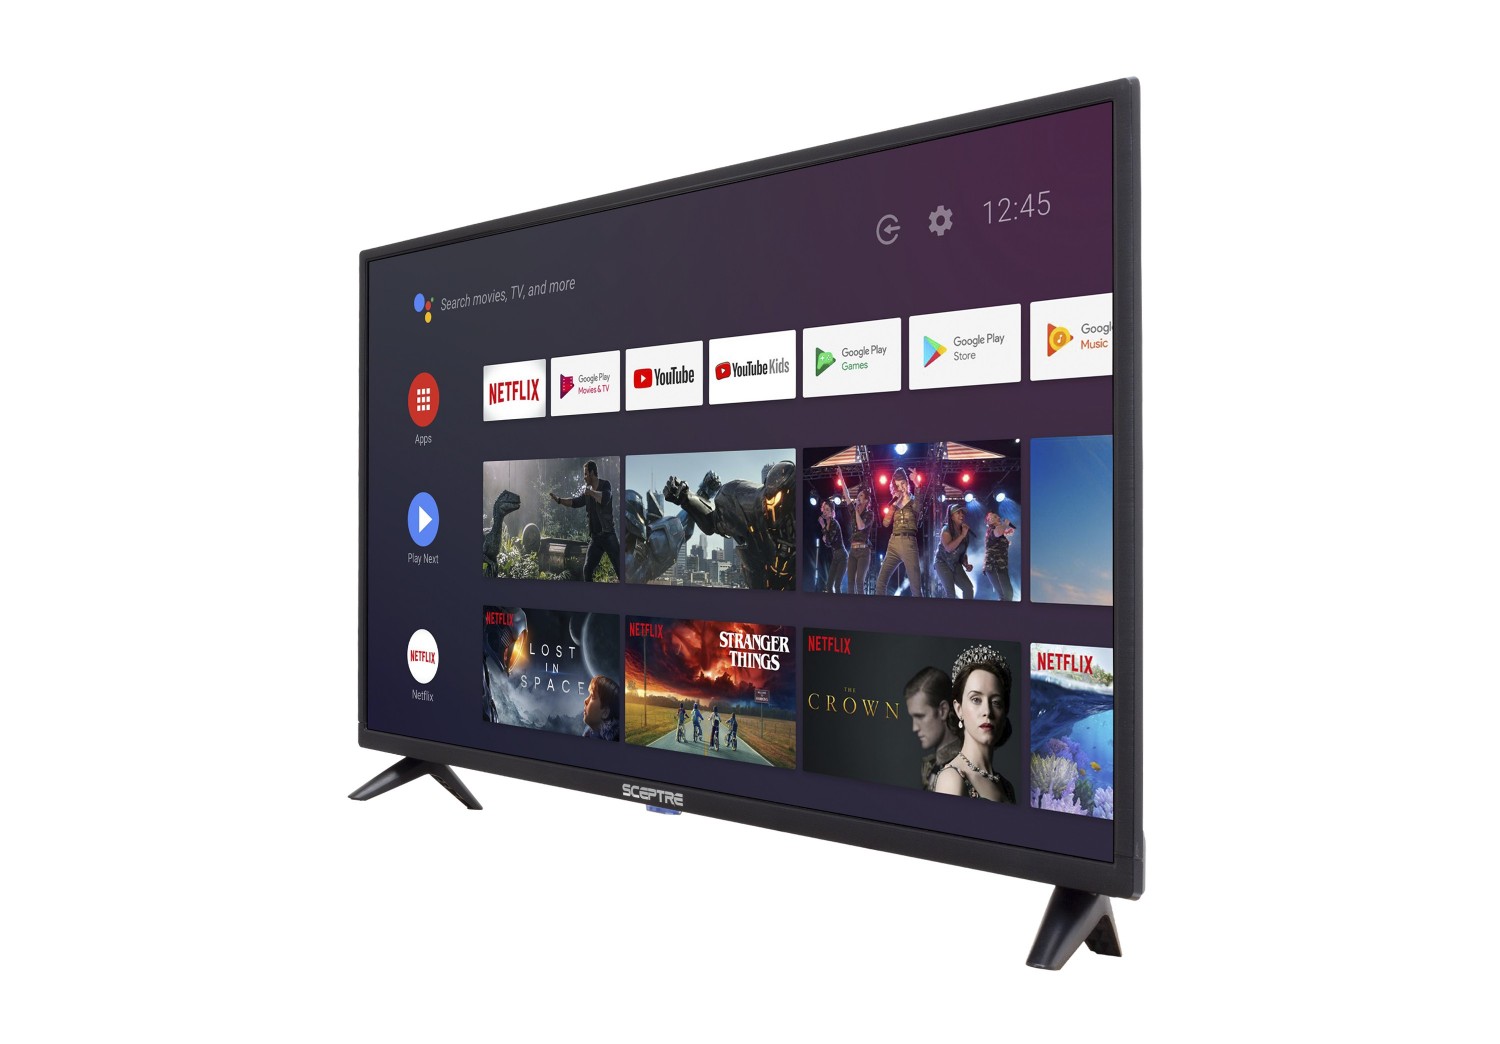 Sceptre 32" Class HD (720p) Android Smart LED TV with Google Assistant (A328BV-SR) - image 4 of 5